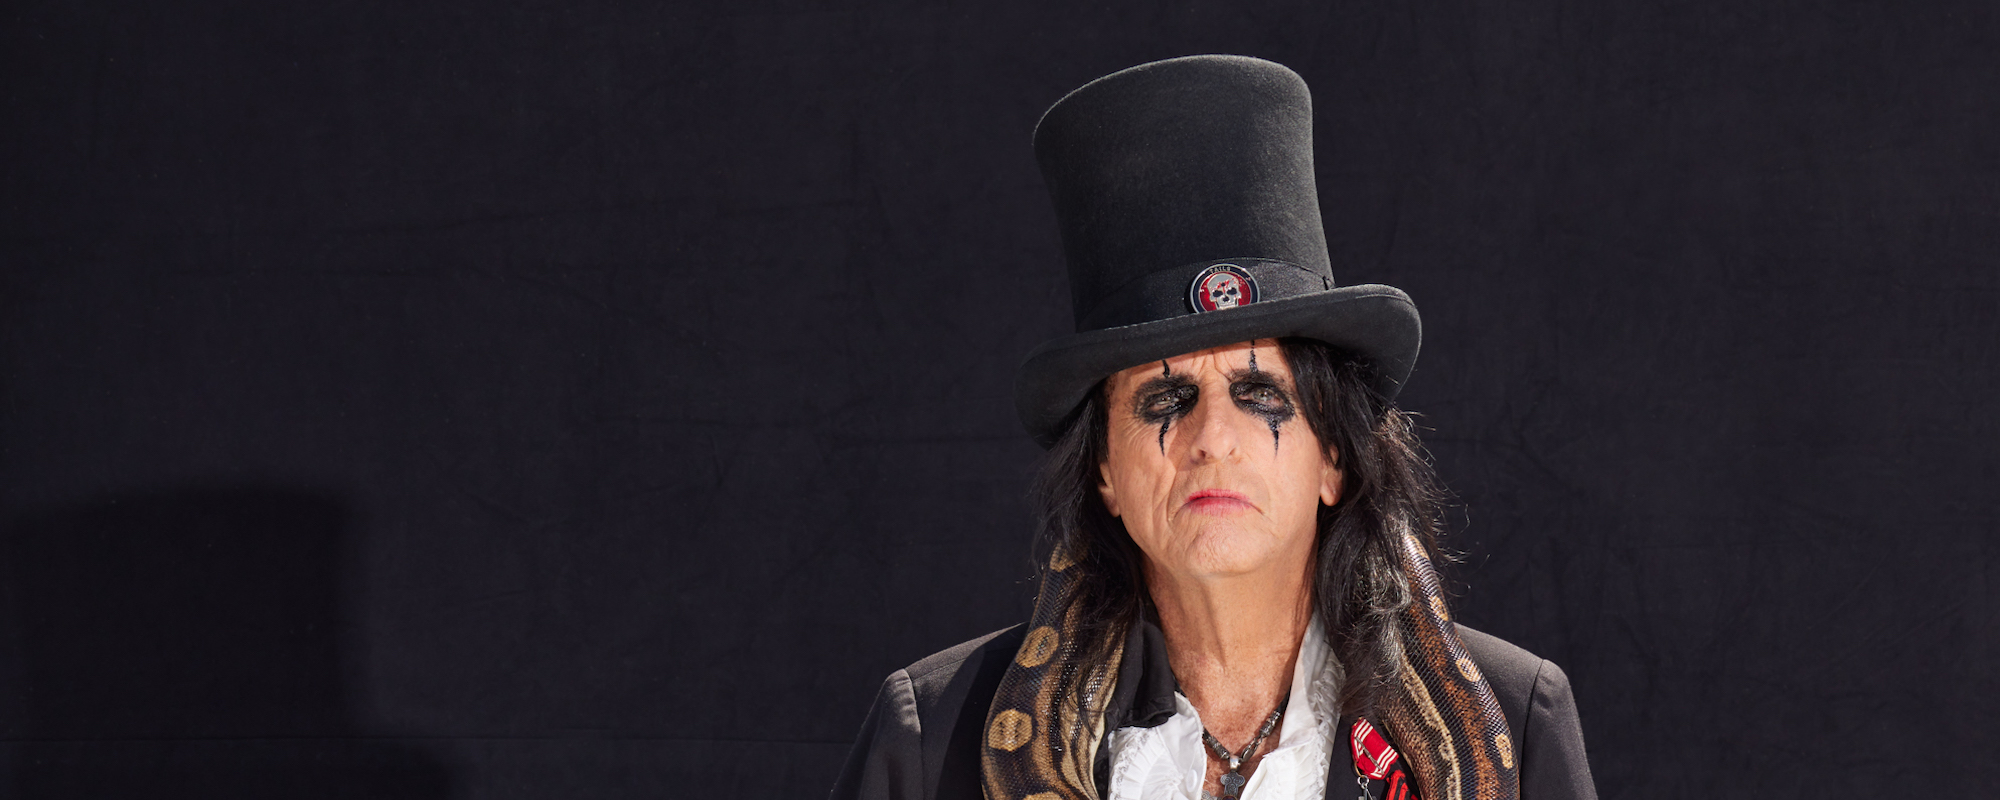 Alice Cooper Reveals “Frankenstein” Song with Tom Morello, Dates with Rob Zombie